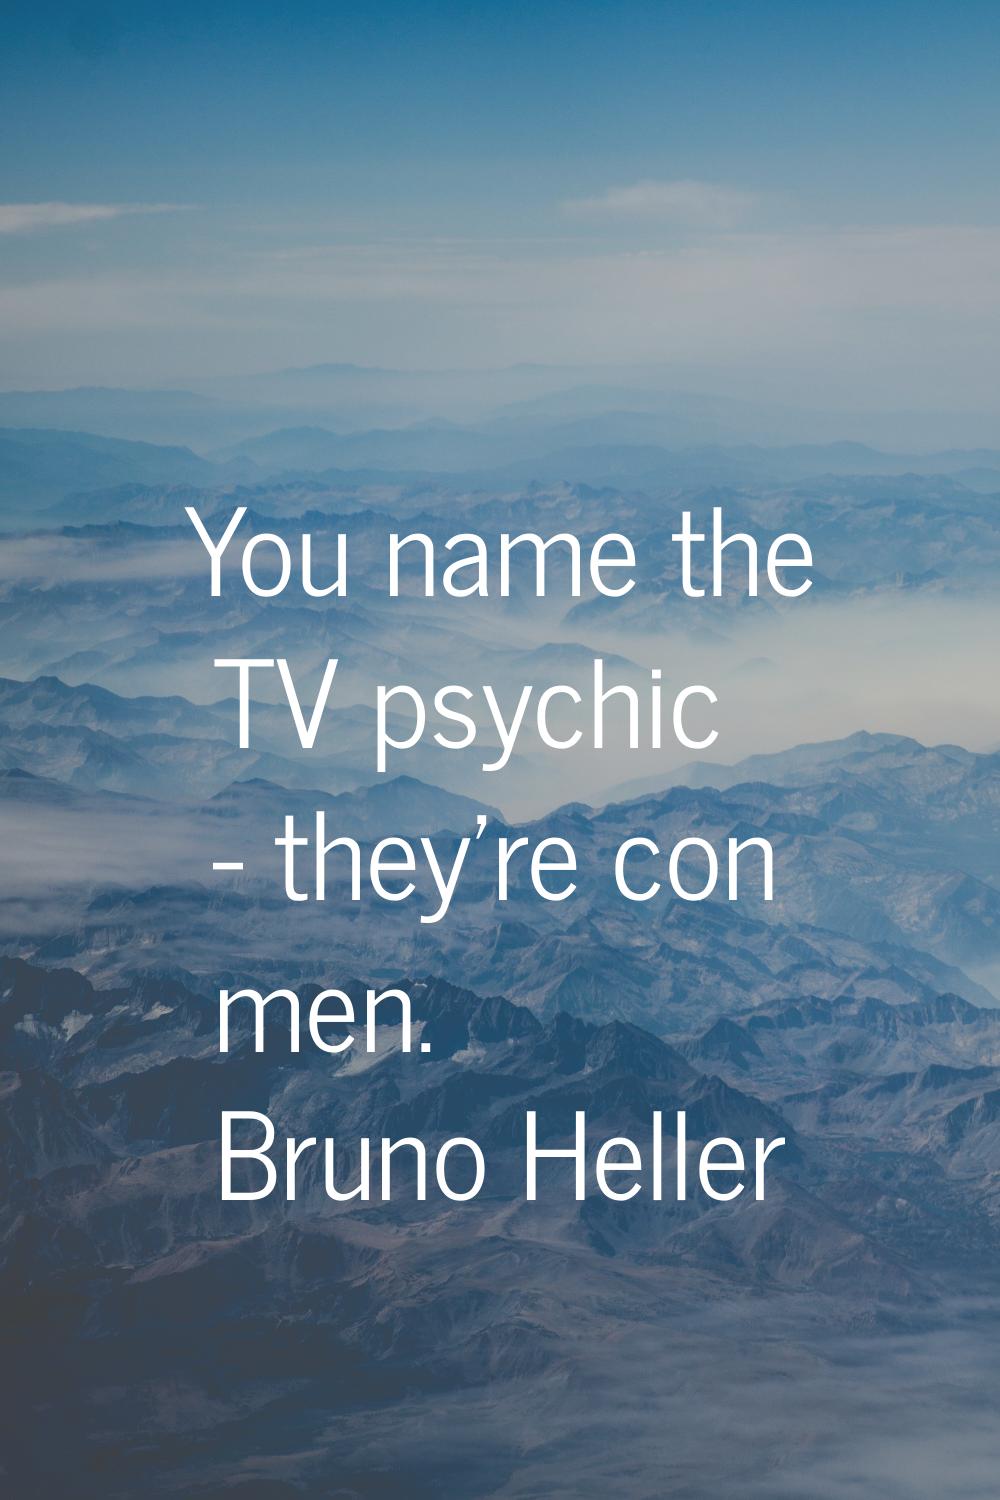 You name the TV psychic - they're con men.